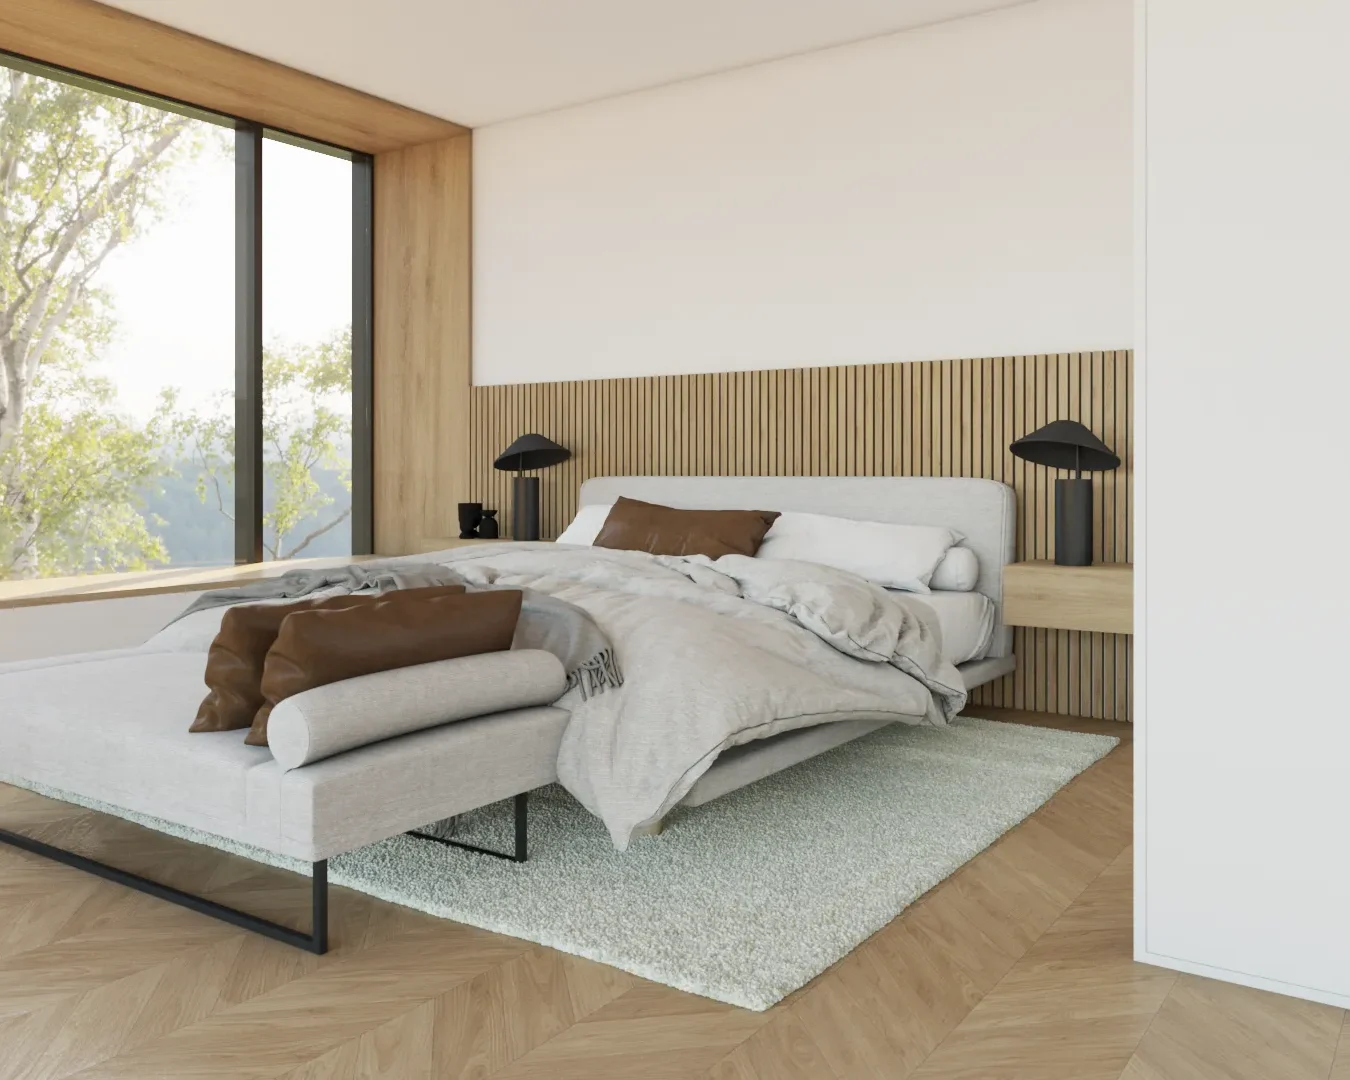 Minimalist bedroom with large windows showcasing scenic views, modern furnishings, and a calming color palette, creating a restful retreat. Design by Debora, an online interior design service.